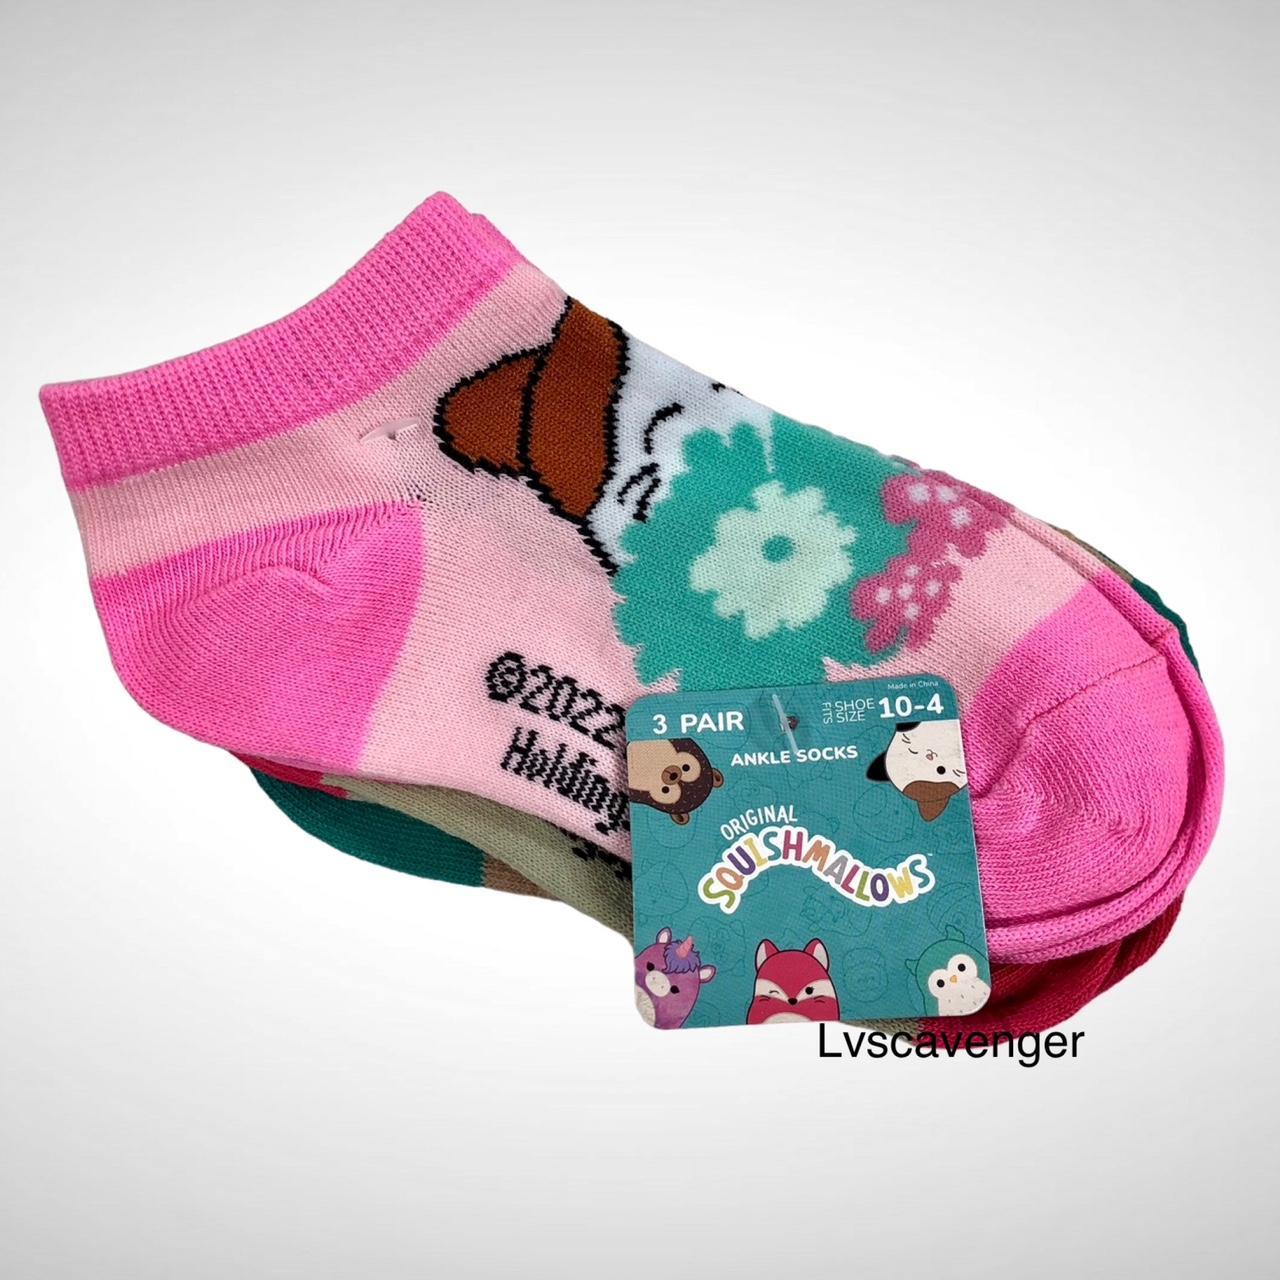 Squishmallow Ankle Socks 3 Pairs Kid’s Size 10-4! ... - Depop